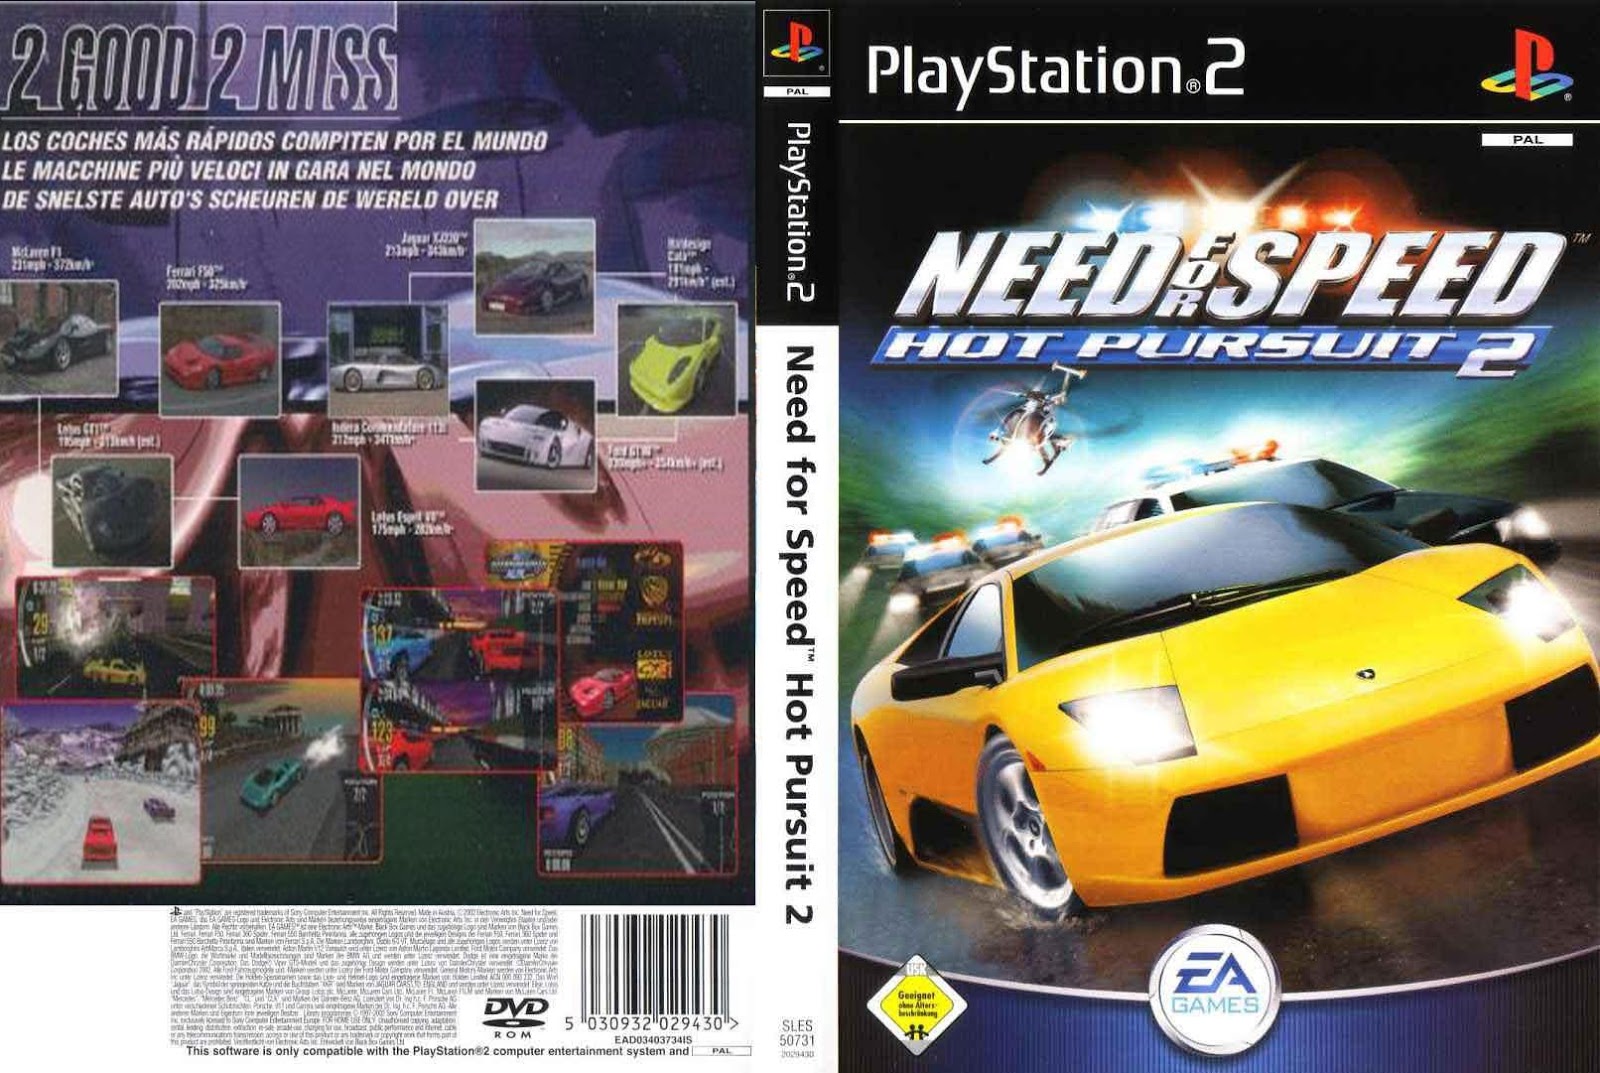 Игры на пс 2 на флешку. Ps2 диск need for Speed. Hot Pursuit 2 PLAYSTATION 2. Hot Pursuit 2002 ps2. Need for Speed hot Pursuit 2 ps2 лицензия.